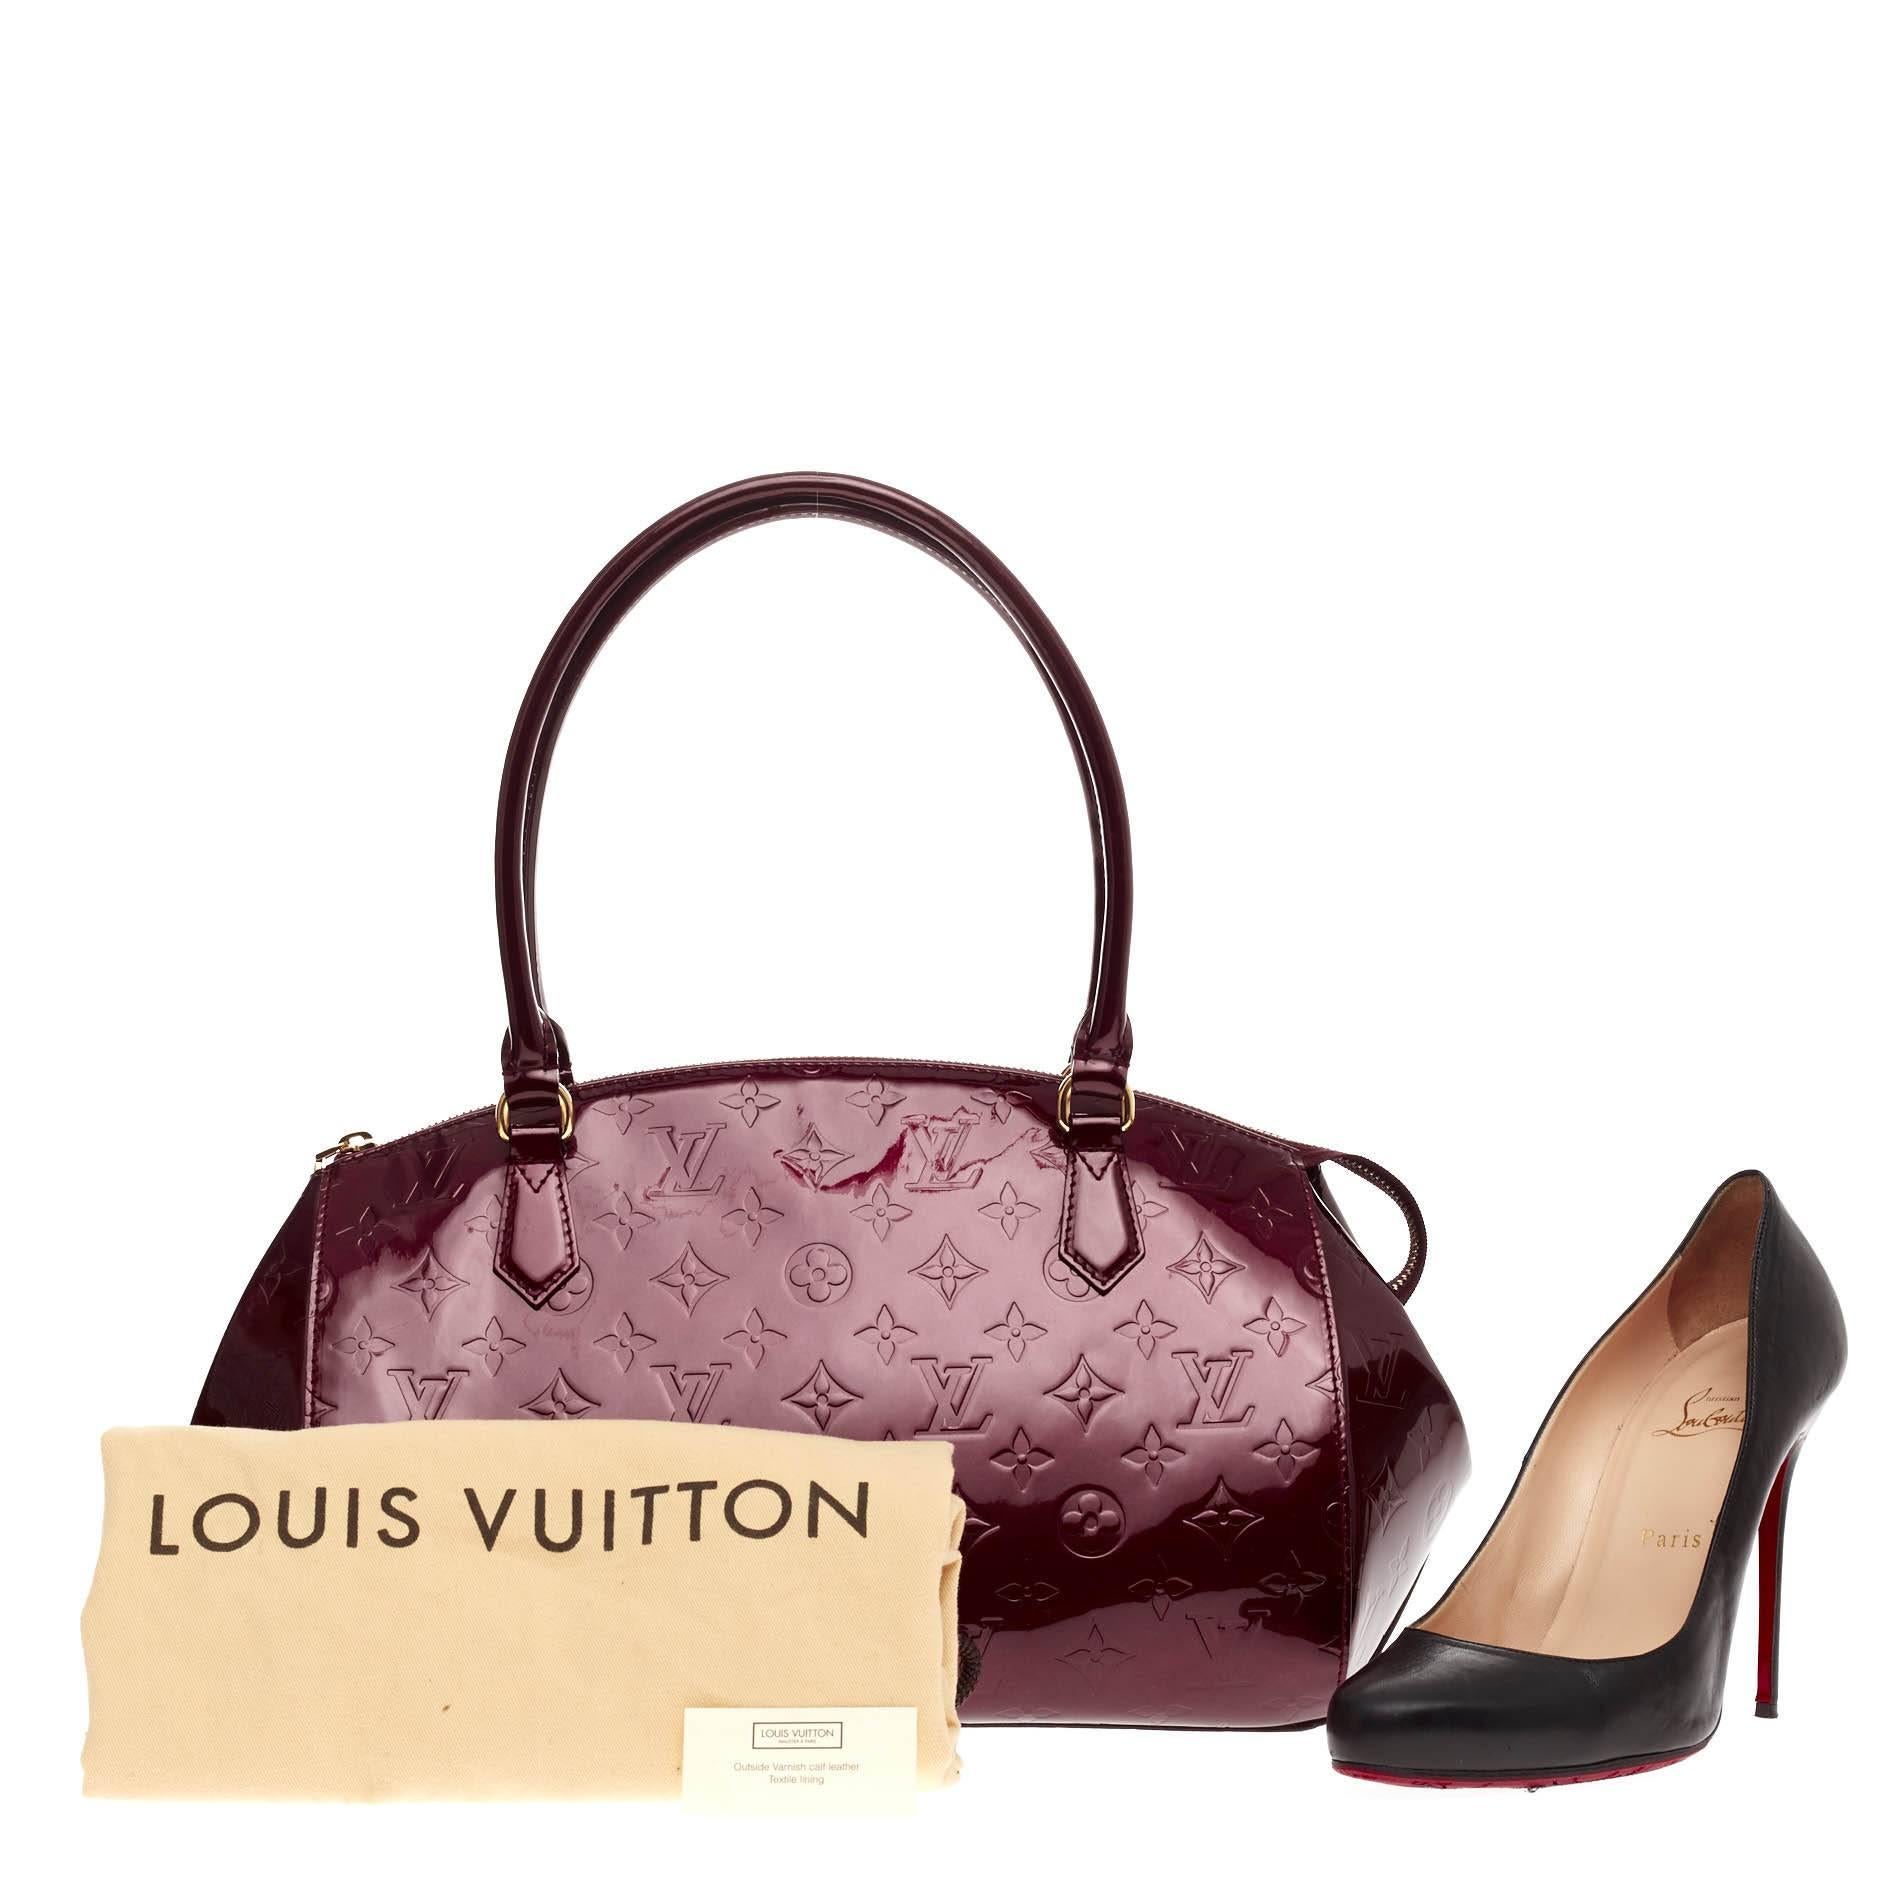 This authentic Louis Vuitton Sherwood Monogram Vernis GM is a uniquely shaped bag that showcase a modern take to Louis Vuitton's classic design. Crafted from rouge fauviste red monogram vernis, this structured dome bag features dual-rolled leather